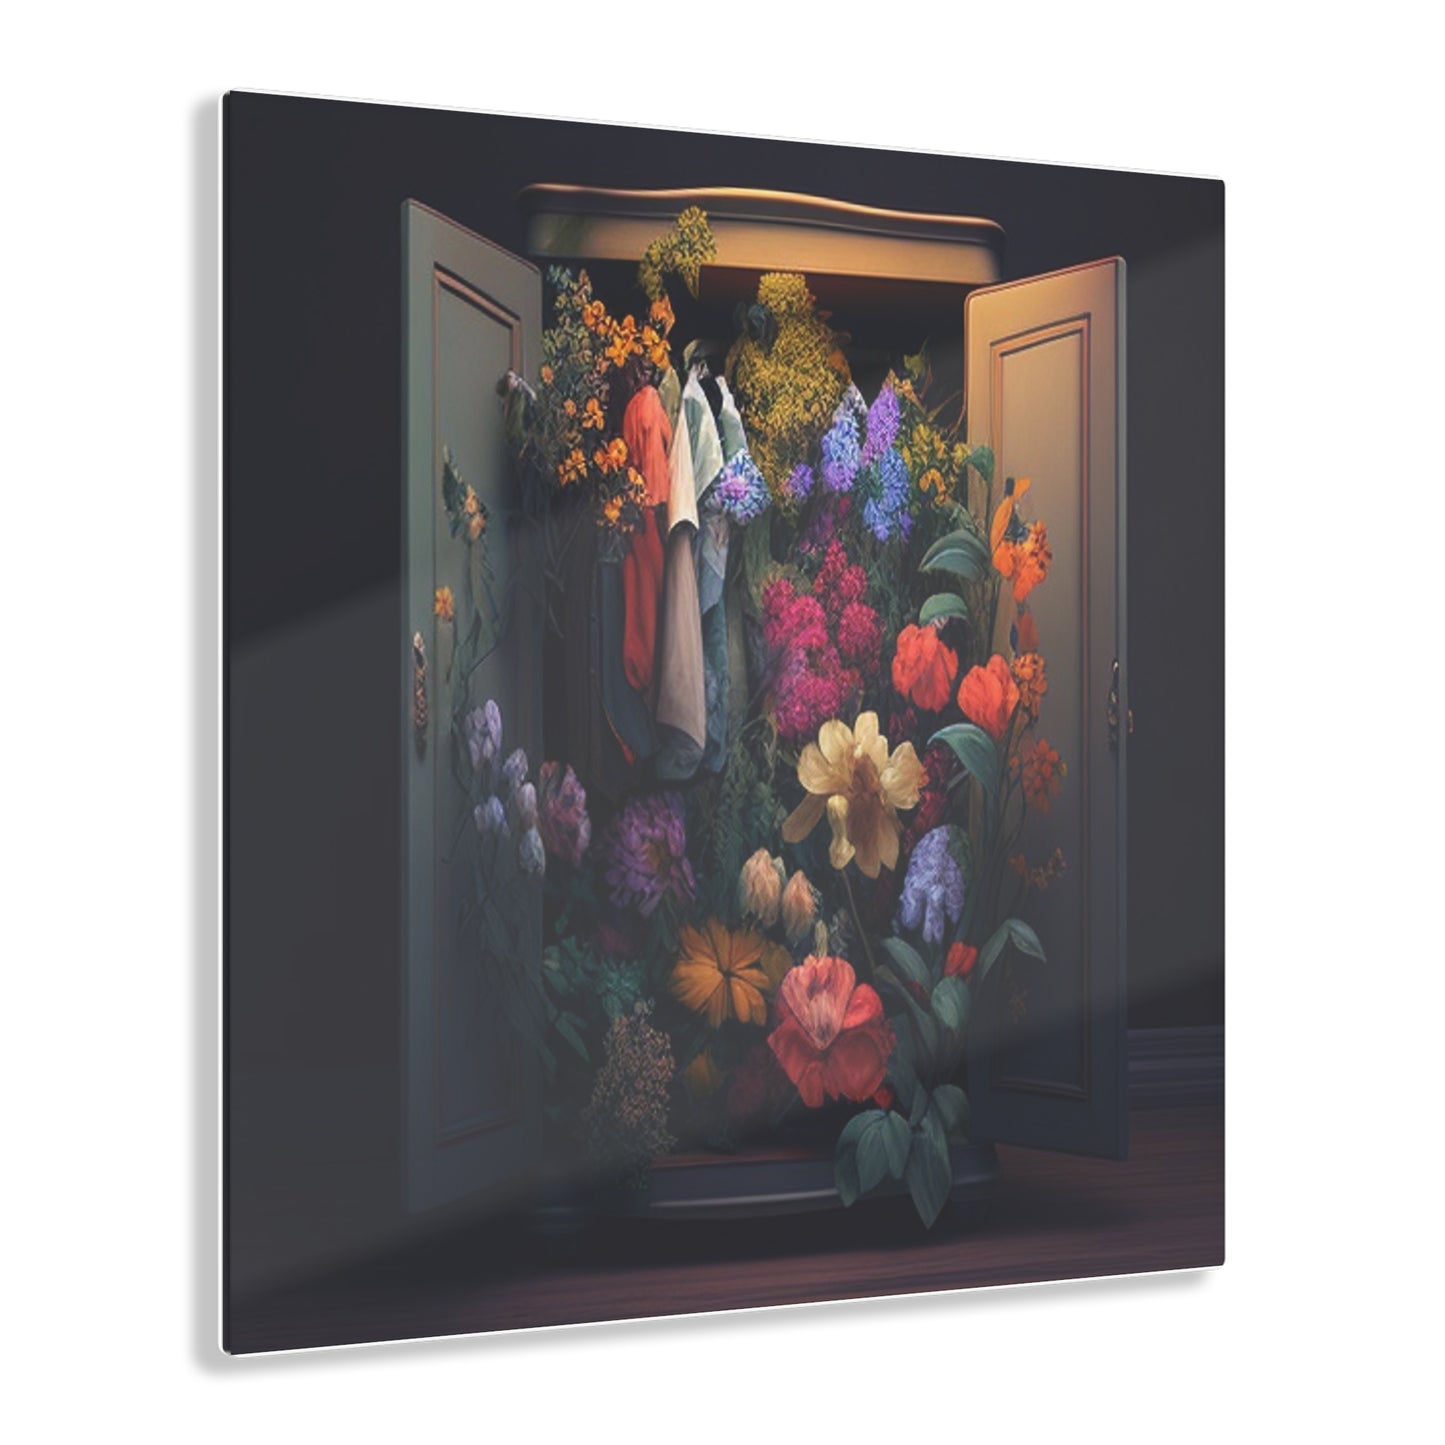 Acrylic Prints A Wardrobe Surrounded by Flowers 4